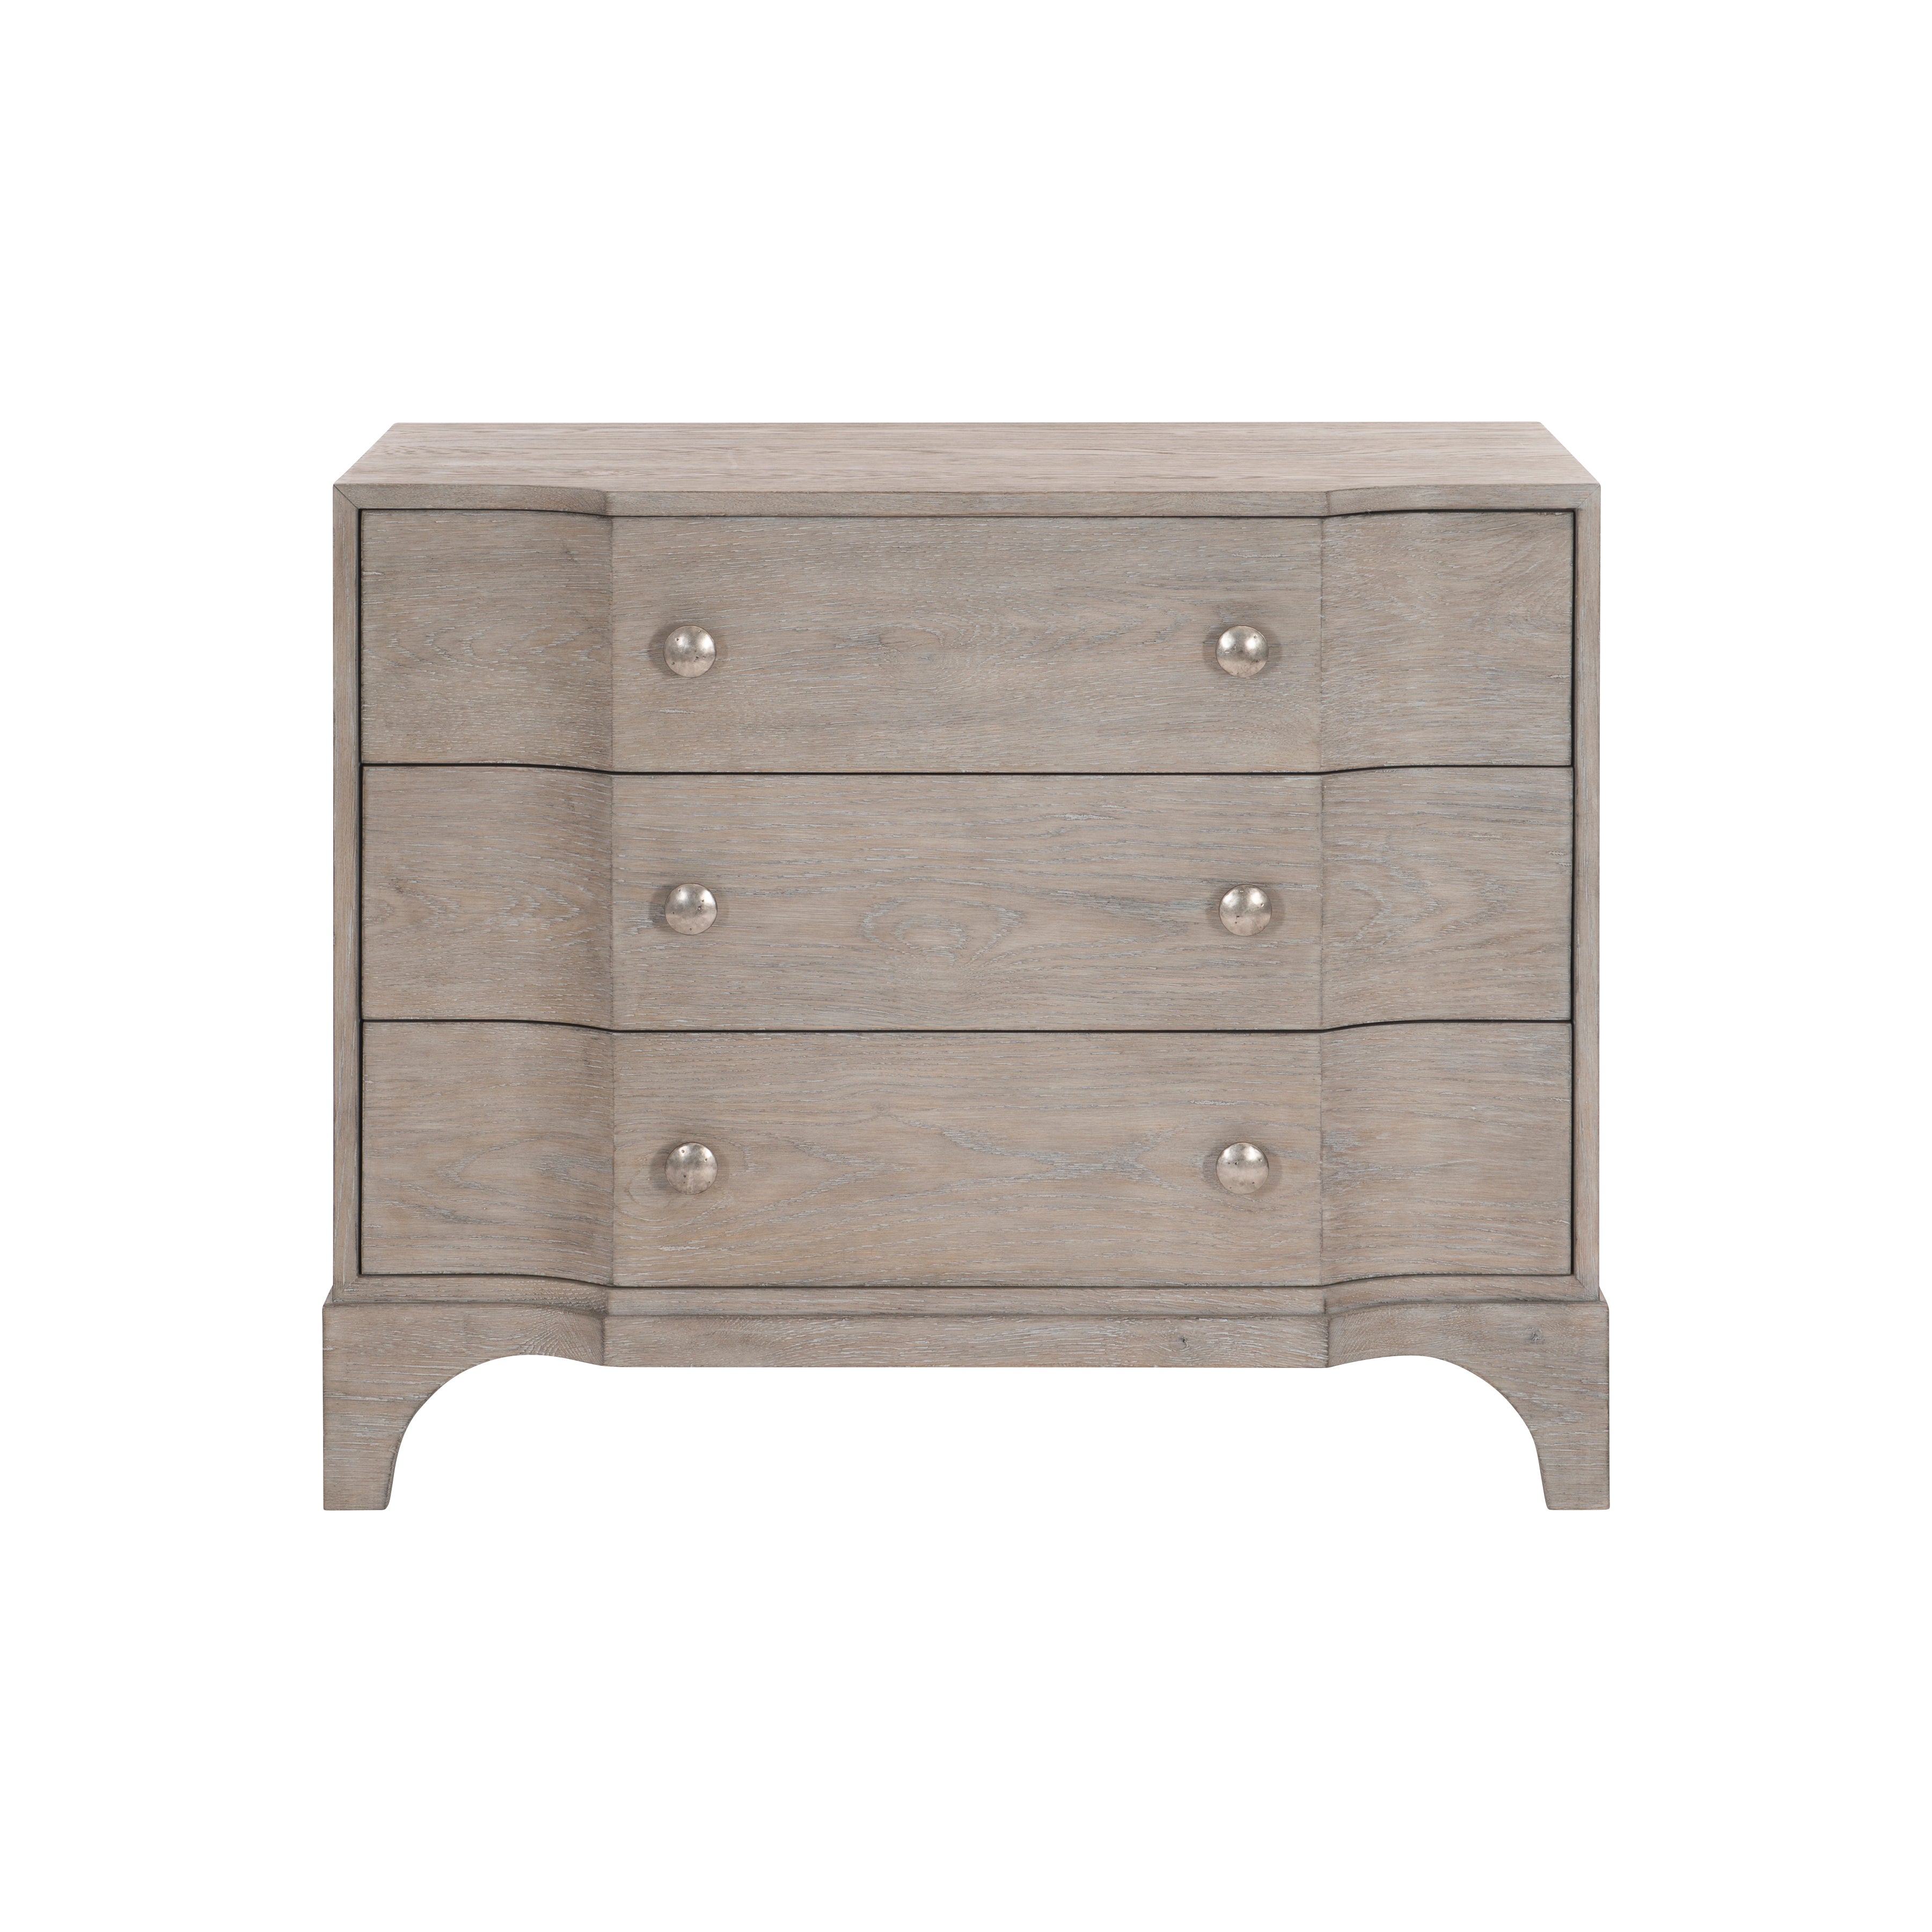 Albion Nightstand (36.5 inch)